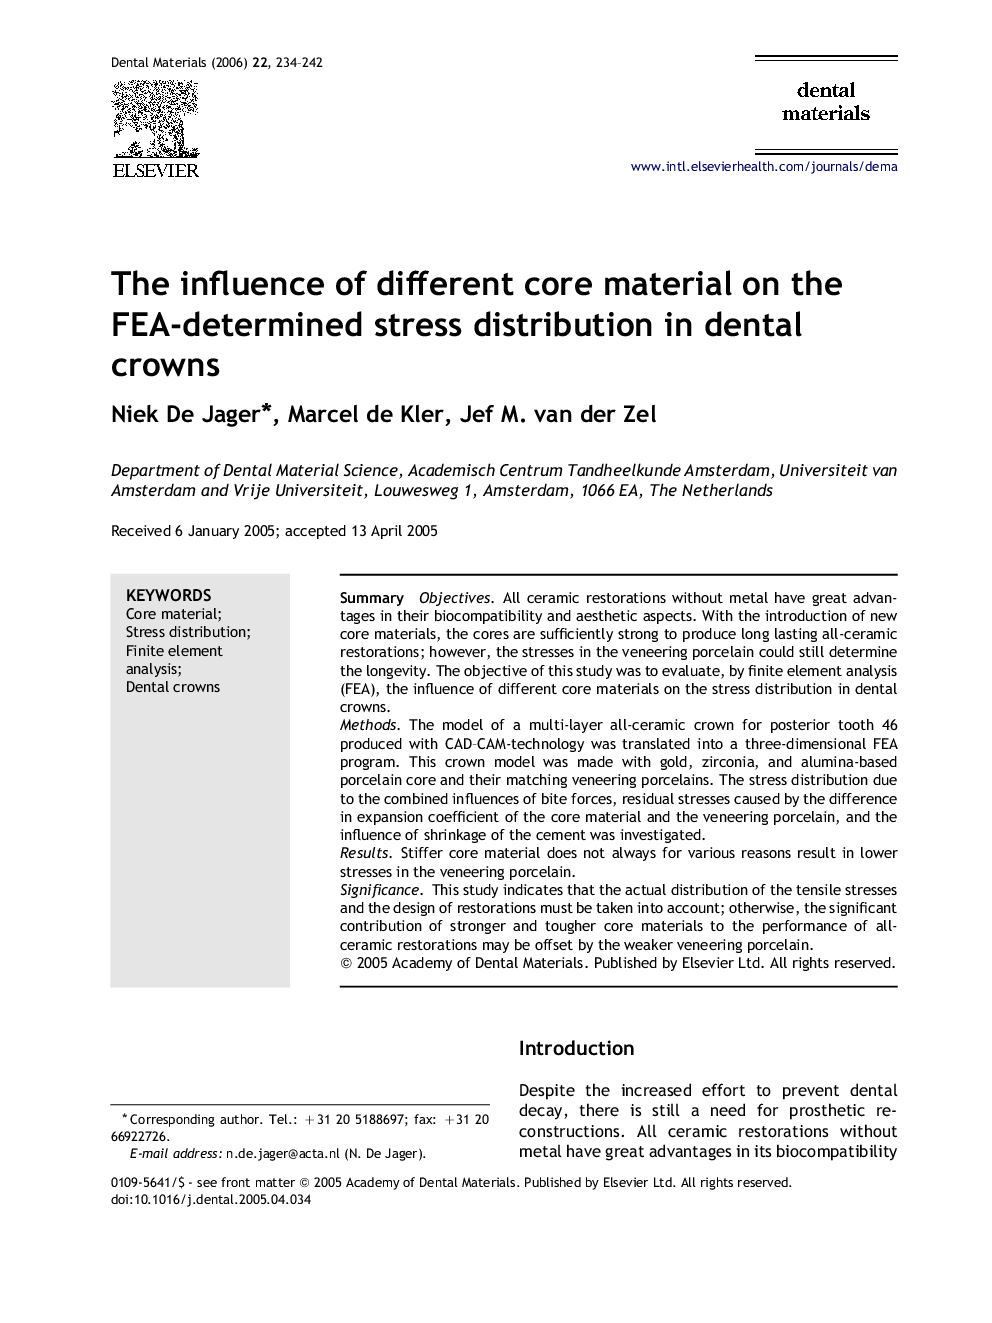 The influence of different core material on the FEA-determined stress distribution in dental crowns